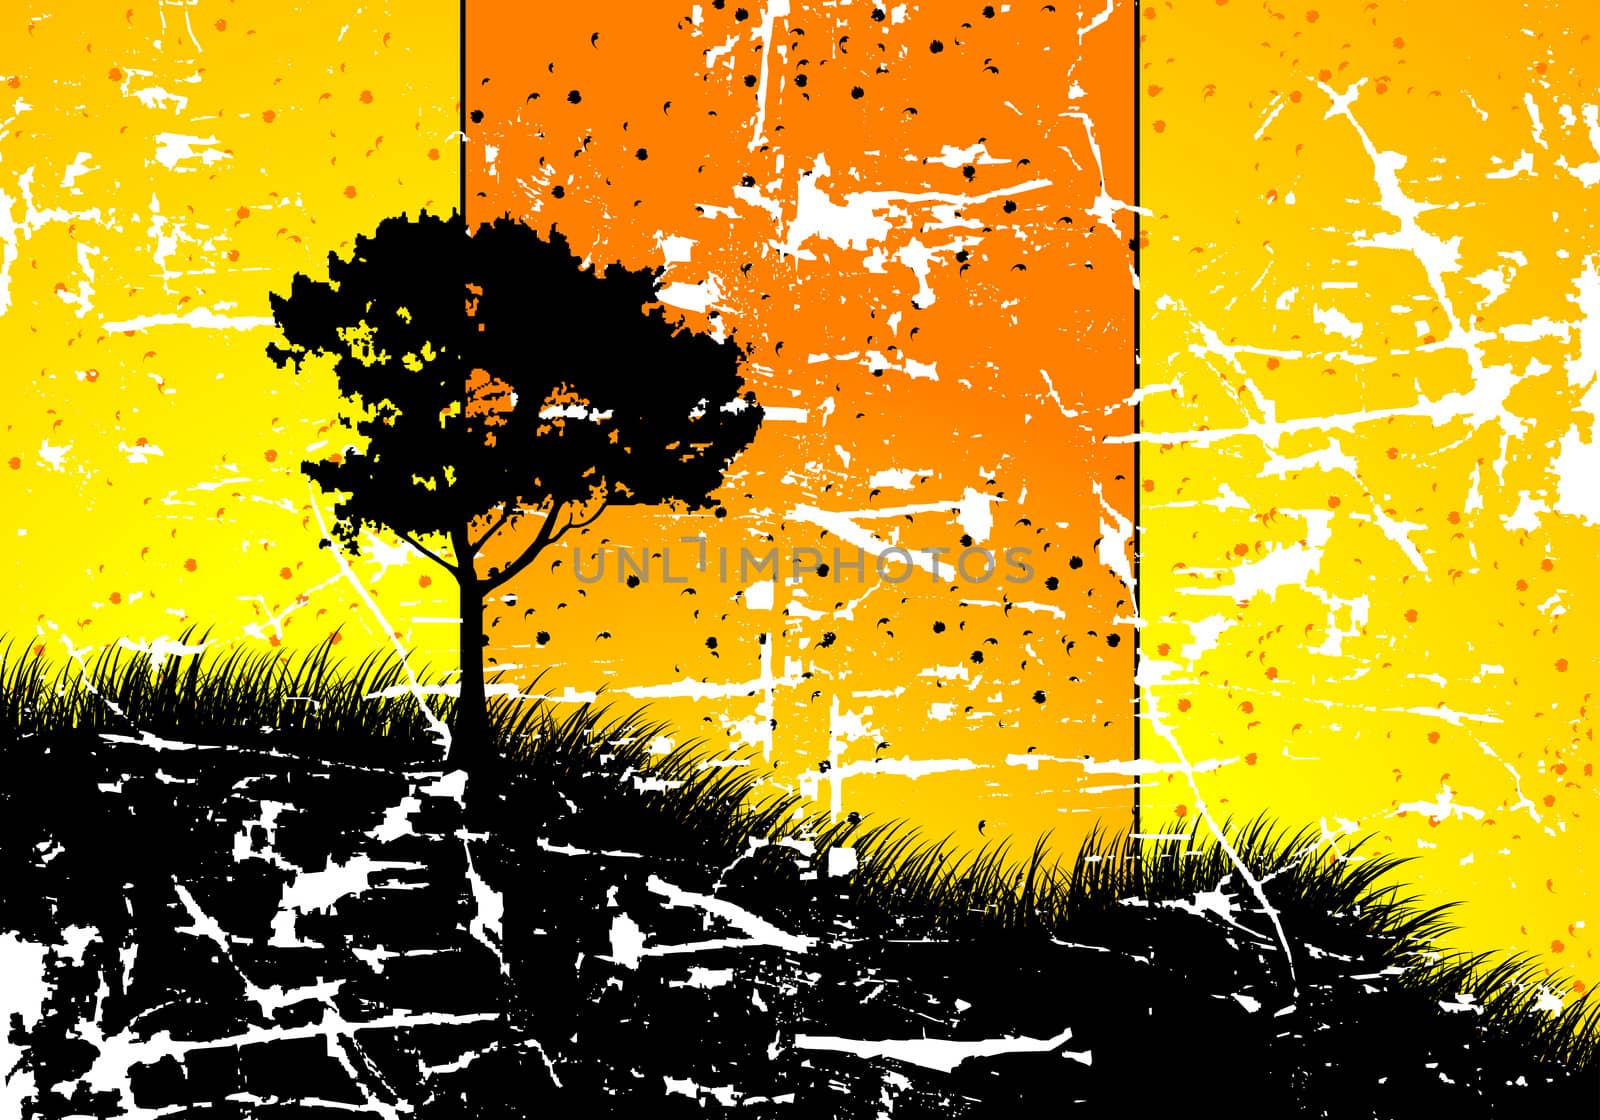 amazing grunge natural sunset landscape with tree silhouette vector illustration